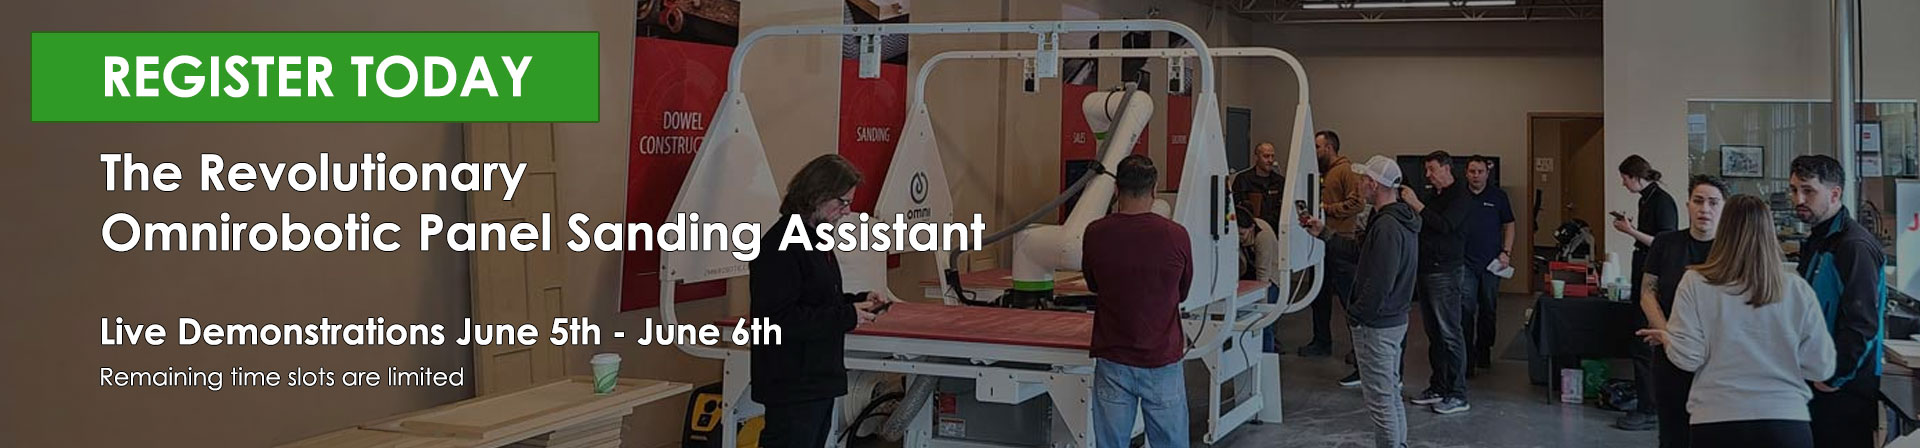 Register for your chance to see the Omnirobotic Panel Sanding Assistant.